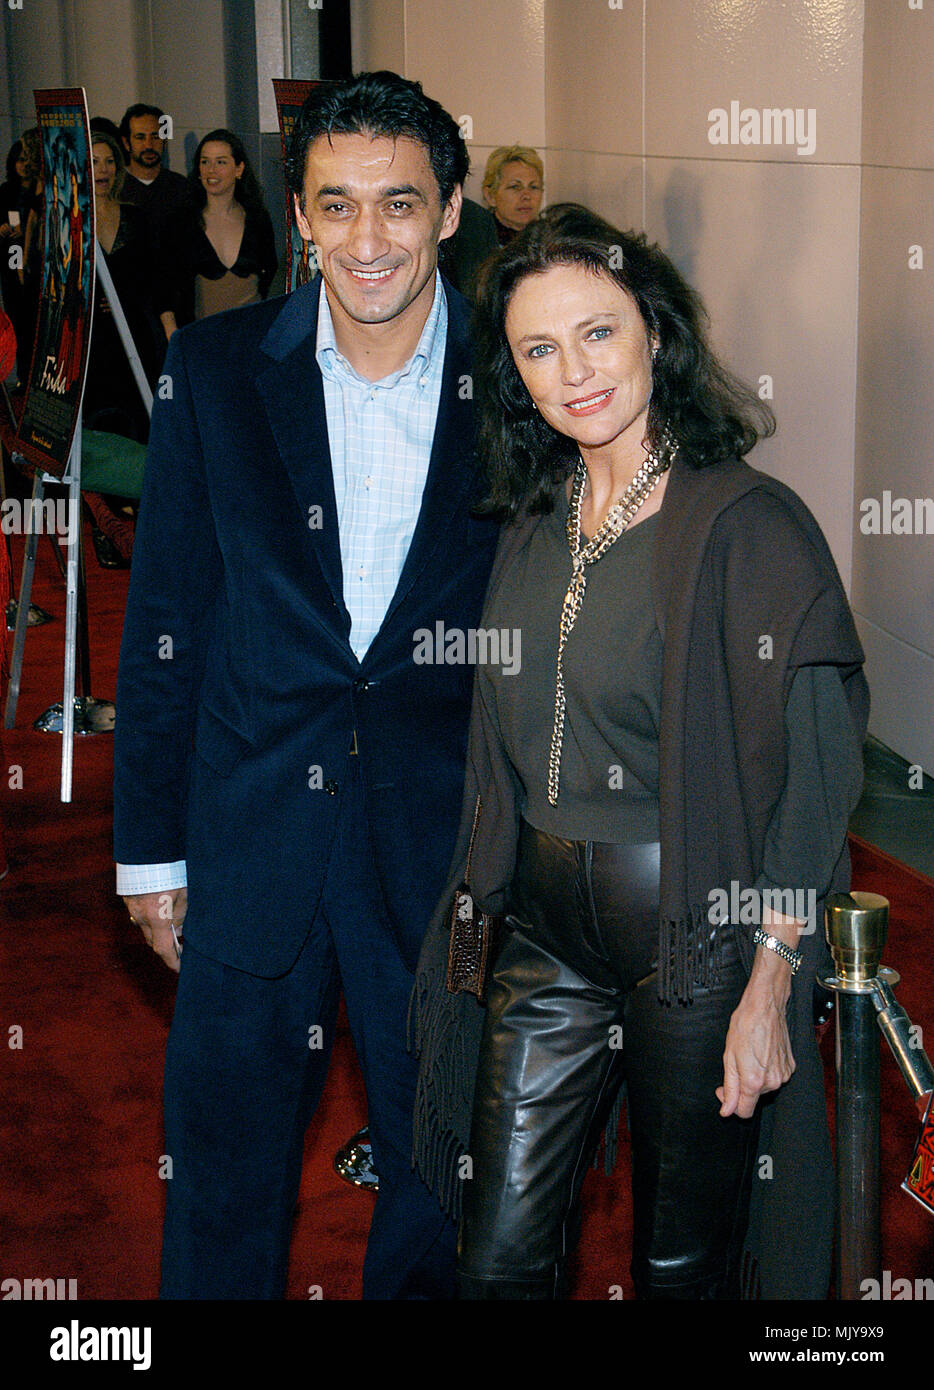 Jacqueline Bisset and Emin Boztepe arriving at the premiere of ' Frida '  at the County Museum of Art Theatre in Los Angeles. October 14, 2002.            -            BissetJacqueline BoztepeE24.JPG           -              BissetJacqueline BoztepeE24.JPGBissetJacqueline BoztepeE24  Event in Hollywood Life - California,  Red Carpet Event, Vertical, USA, Film Industry, Celebrities,  Photography, Bestof, Arts Culture and Entertainment, Topix Celebrities fashion /  from the Red Carpet-, Vertical, Best of, Hollywood Life, Event in Hollywood Life - California,  Red Carpet , USA, Film Industry, Cel Stock Photo